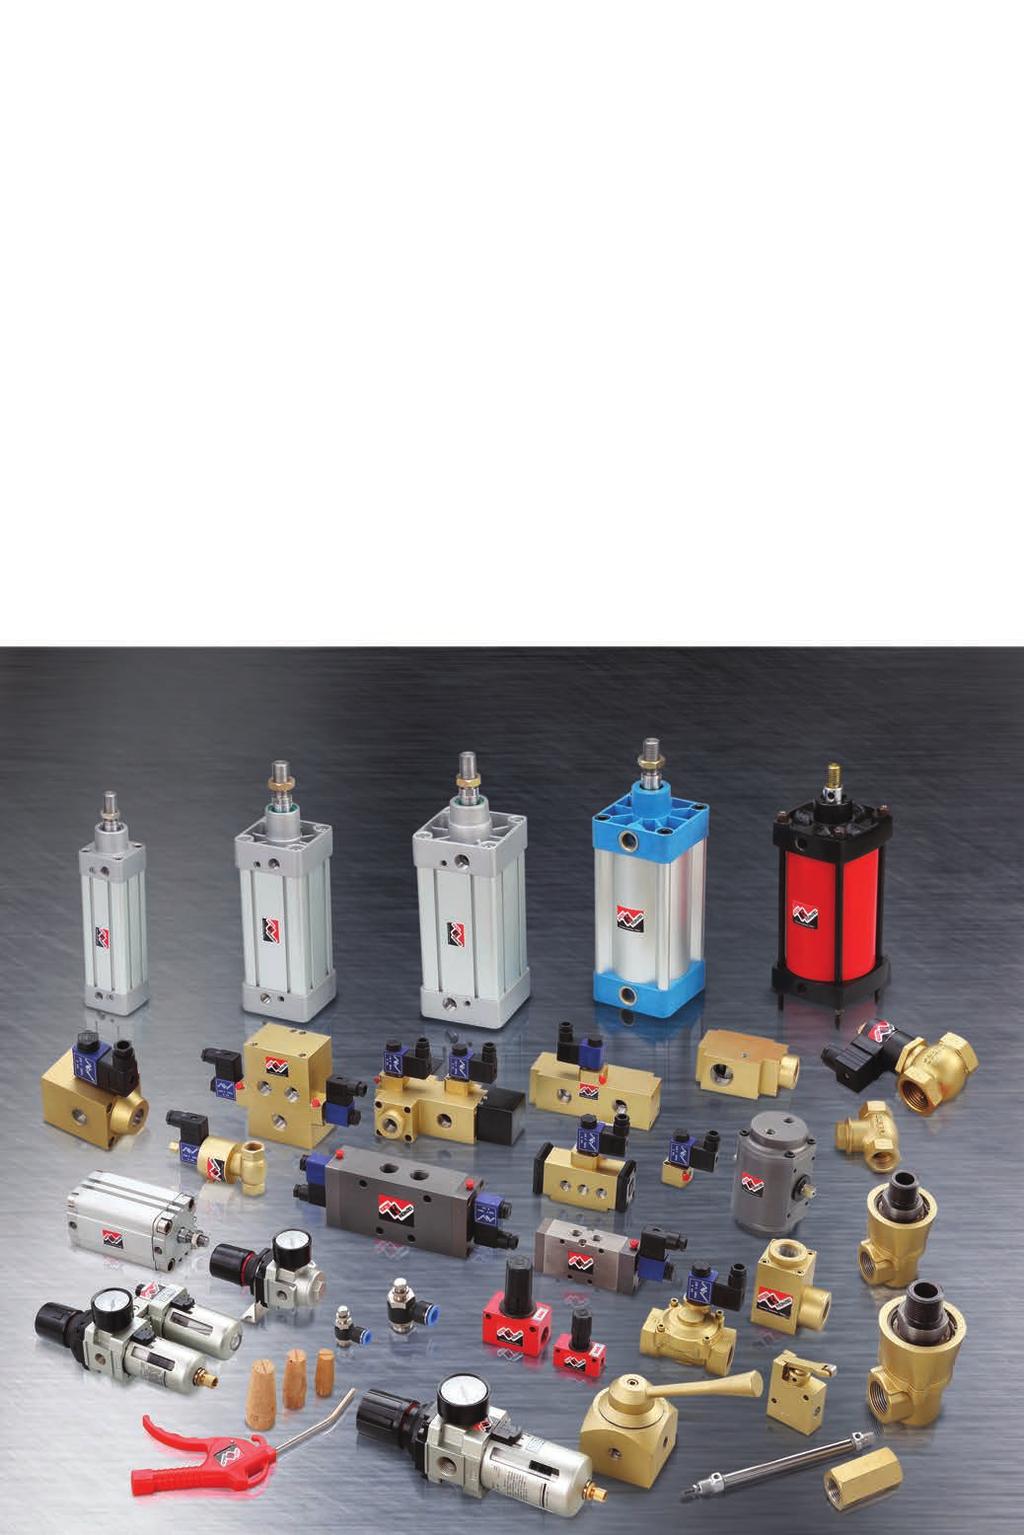 lectropneumatics Fluid Power ivision (FP) lectropneumatics and Hydraulics (I) Pvt. Ltd. started its Fluid Power ivision with the manufacture of pneumatic valves in 972.